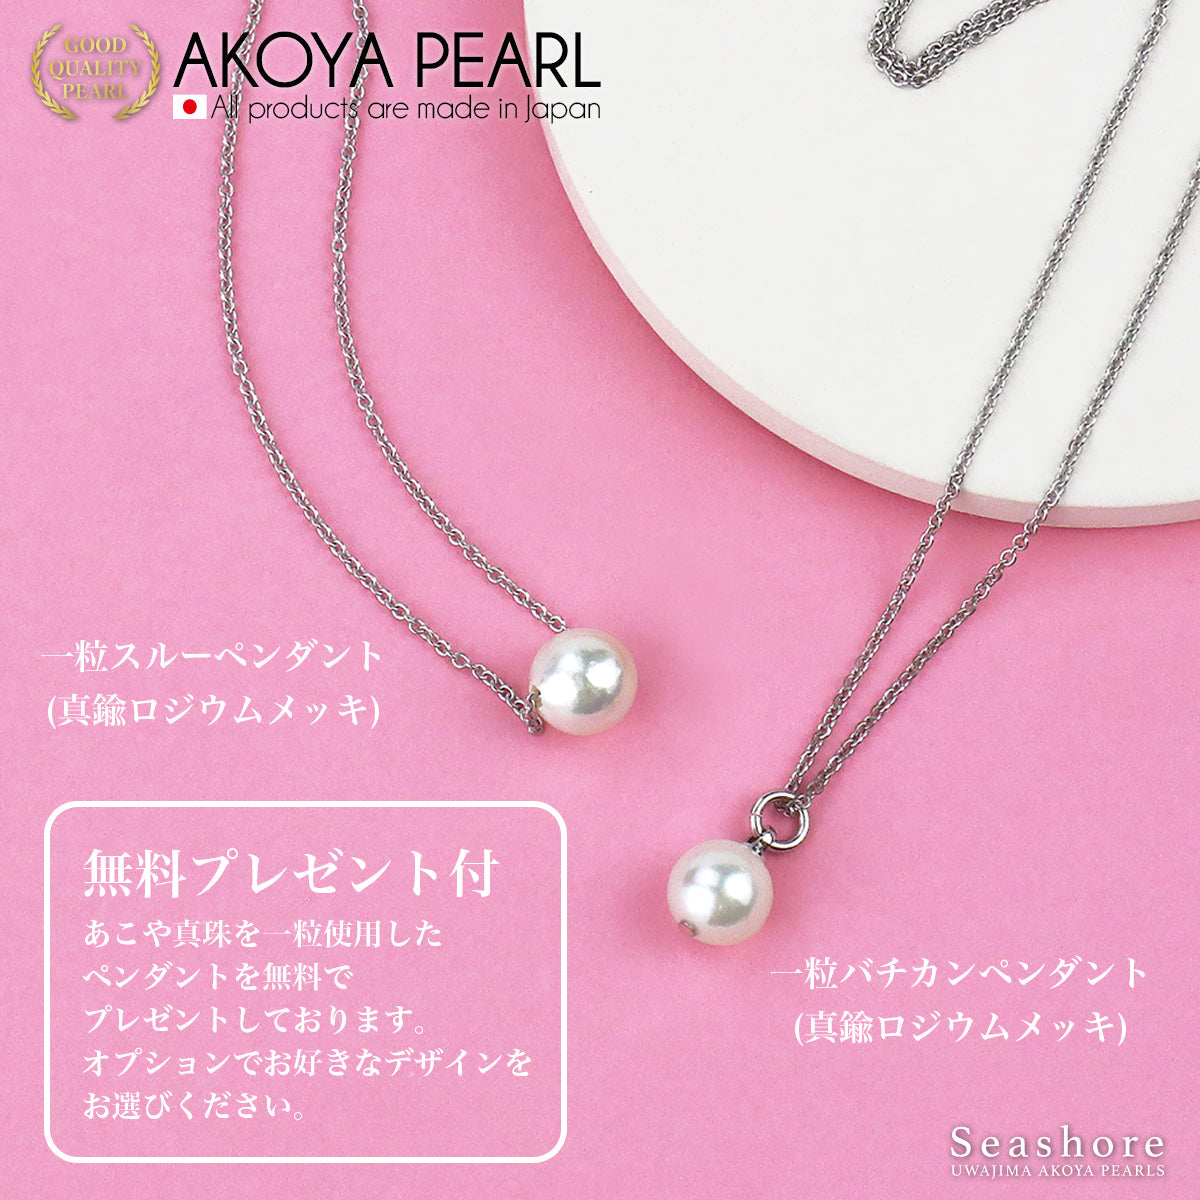 [Natural White] [Gray] Pearl American Earrings Straight Line [8.0-8.5mm] SV925 Akoya Akoya Pearl Accessories Free Gift Included Storage Case Included